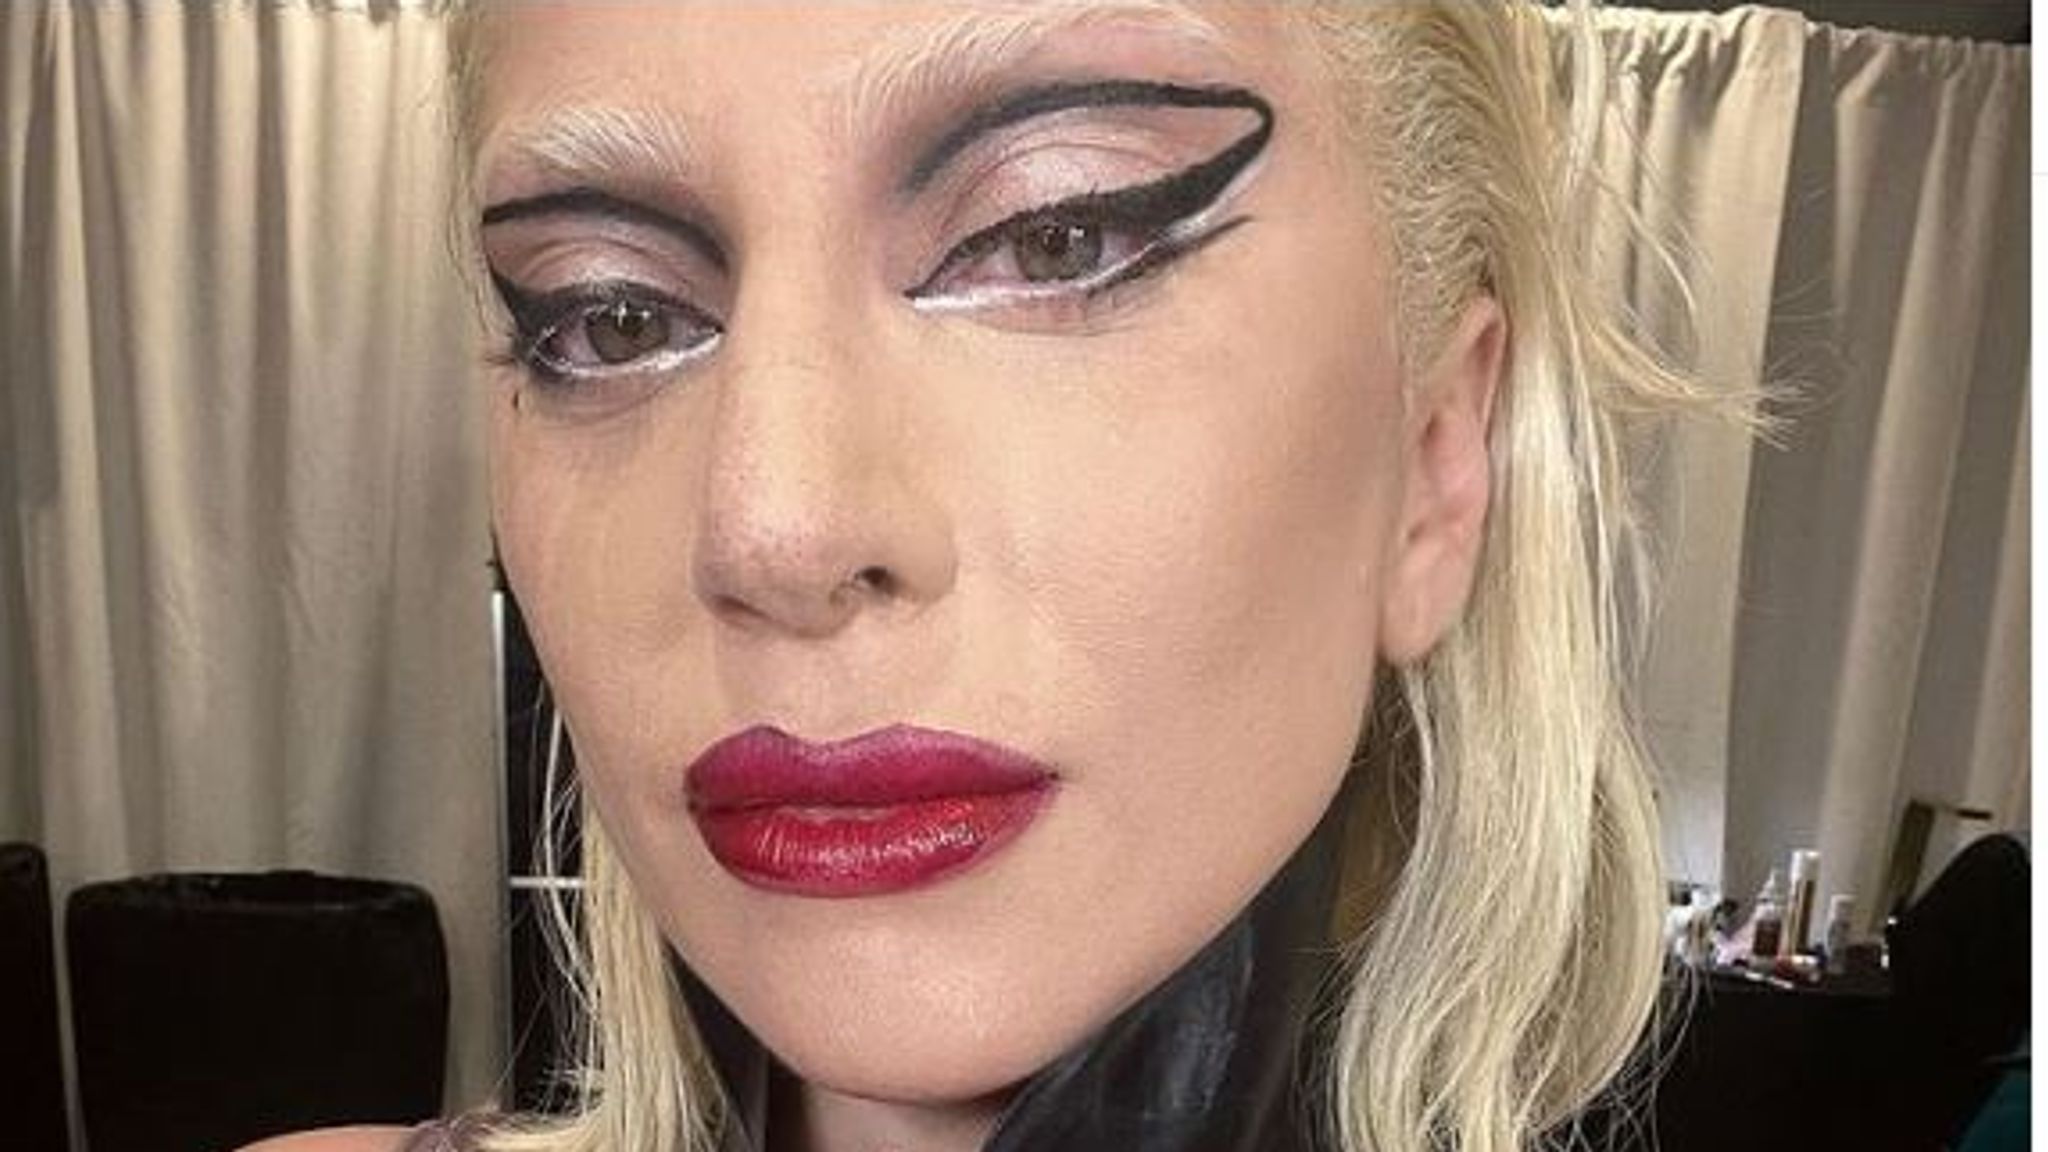 Lady Gaga will not have to pay $500,000 reward to woman tied to